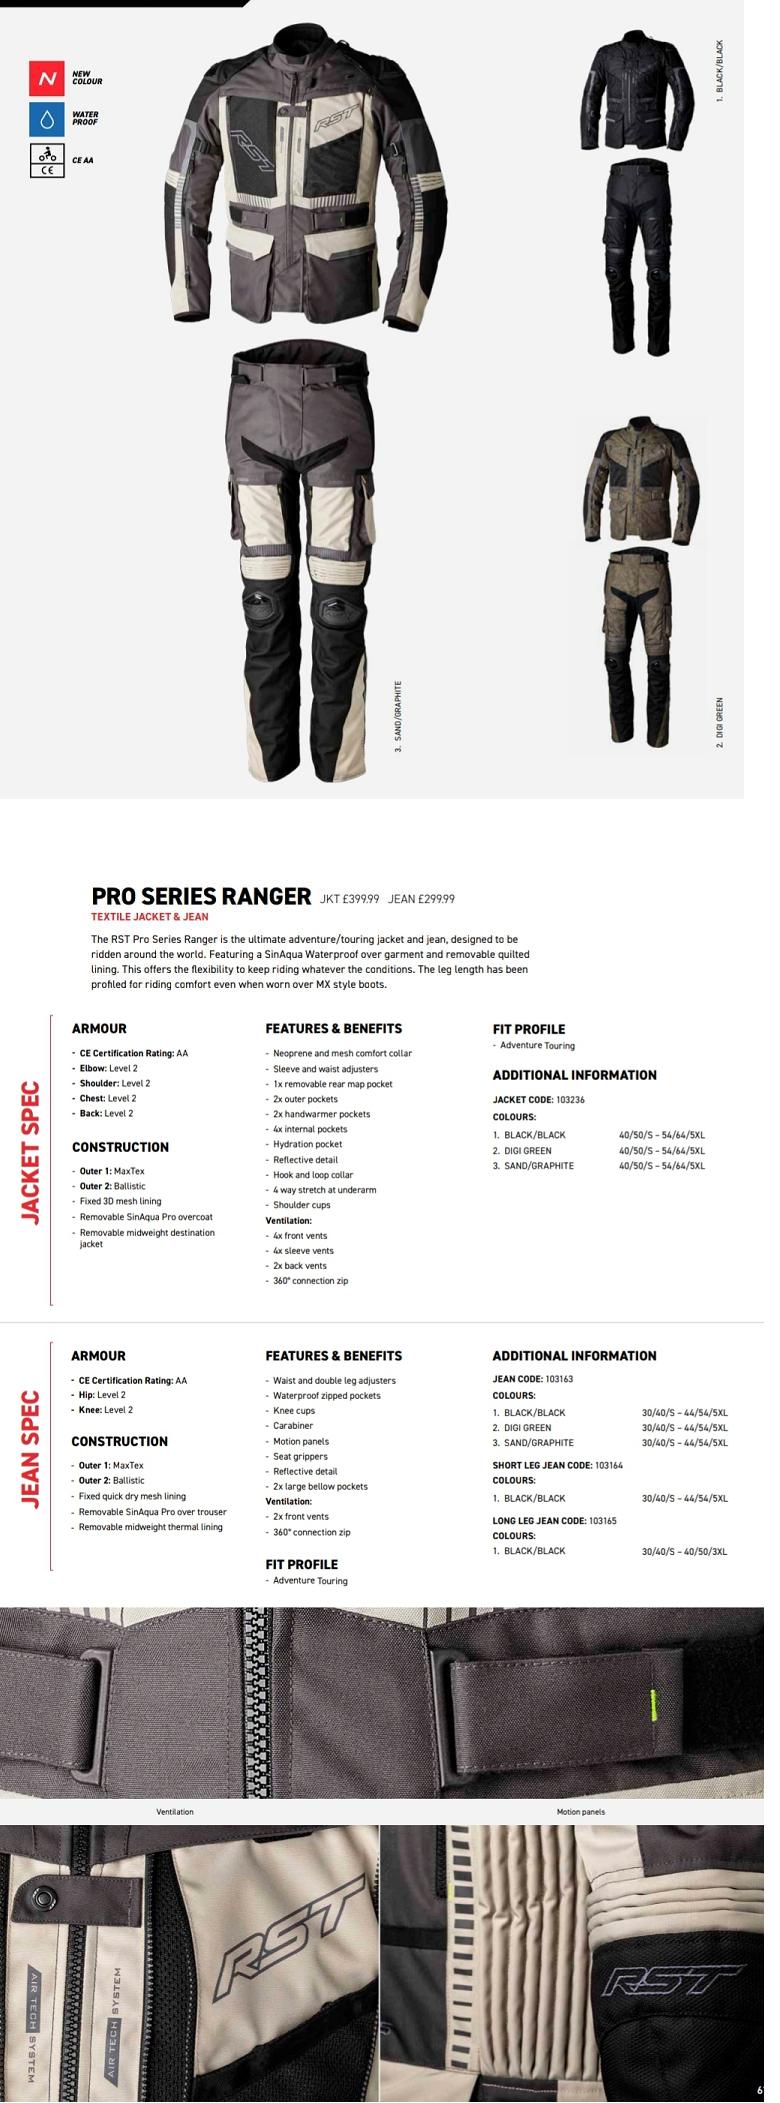 RST Pro Series Ranger textile jacket and pant